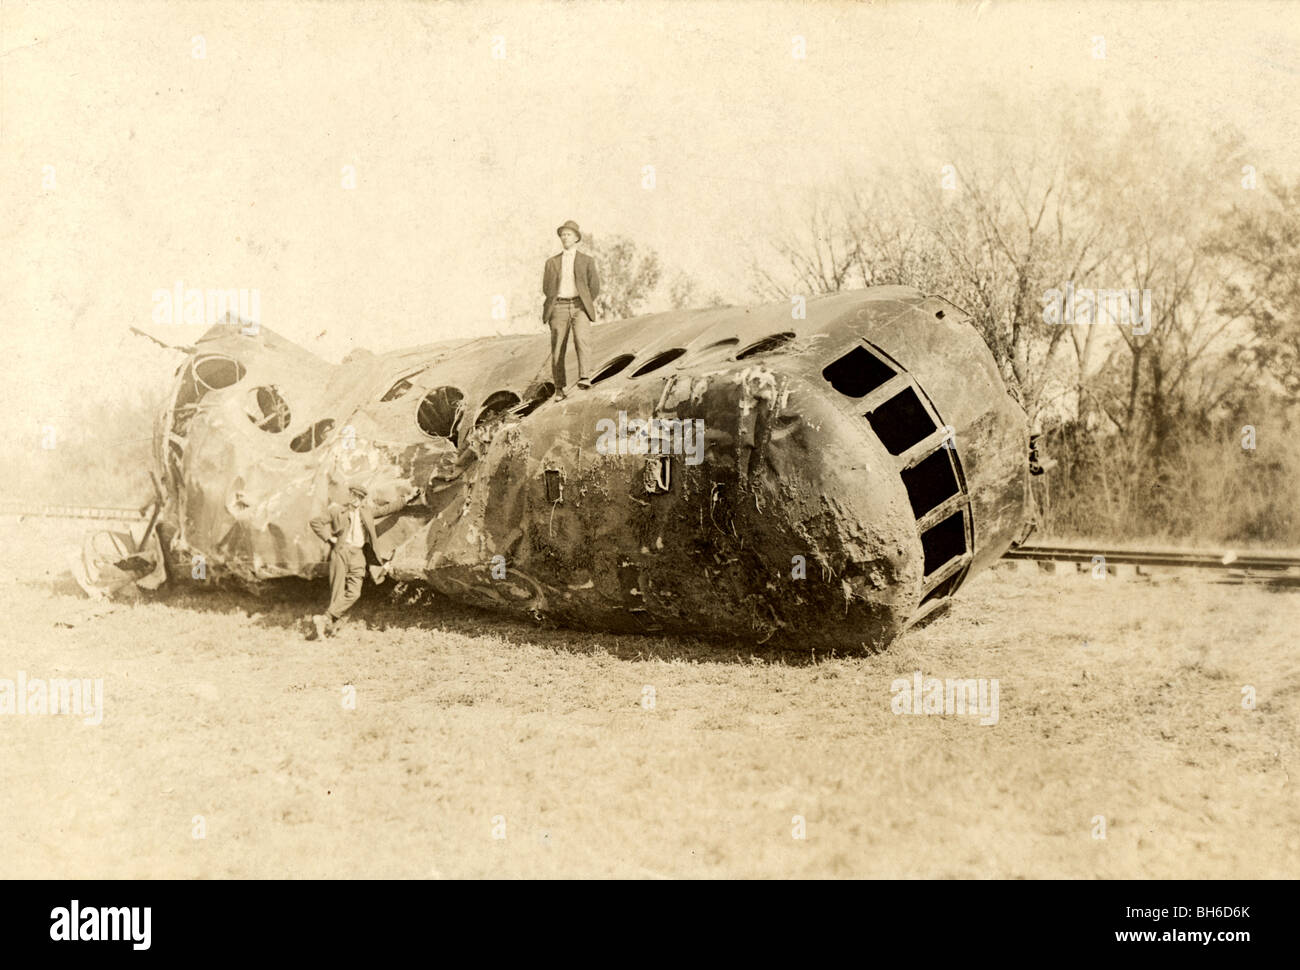 Two Men at Wrecked & Mangled Trolley Car Stock Photo